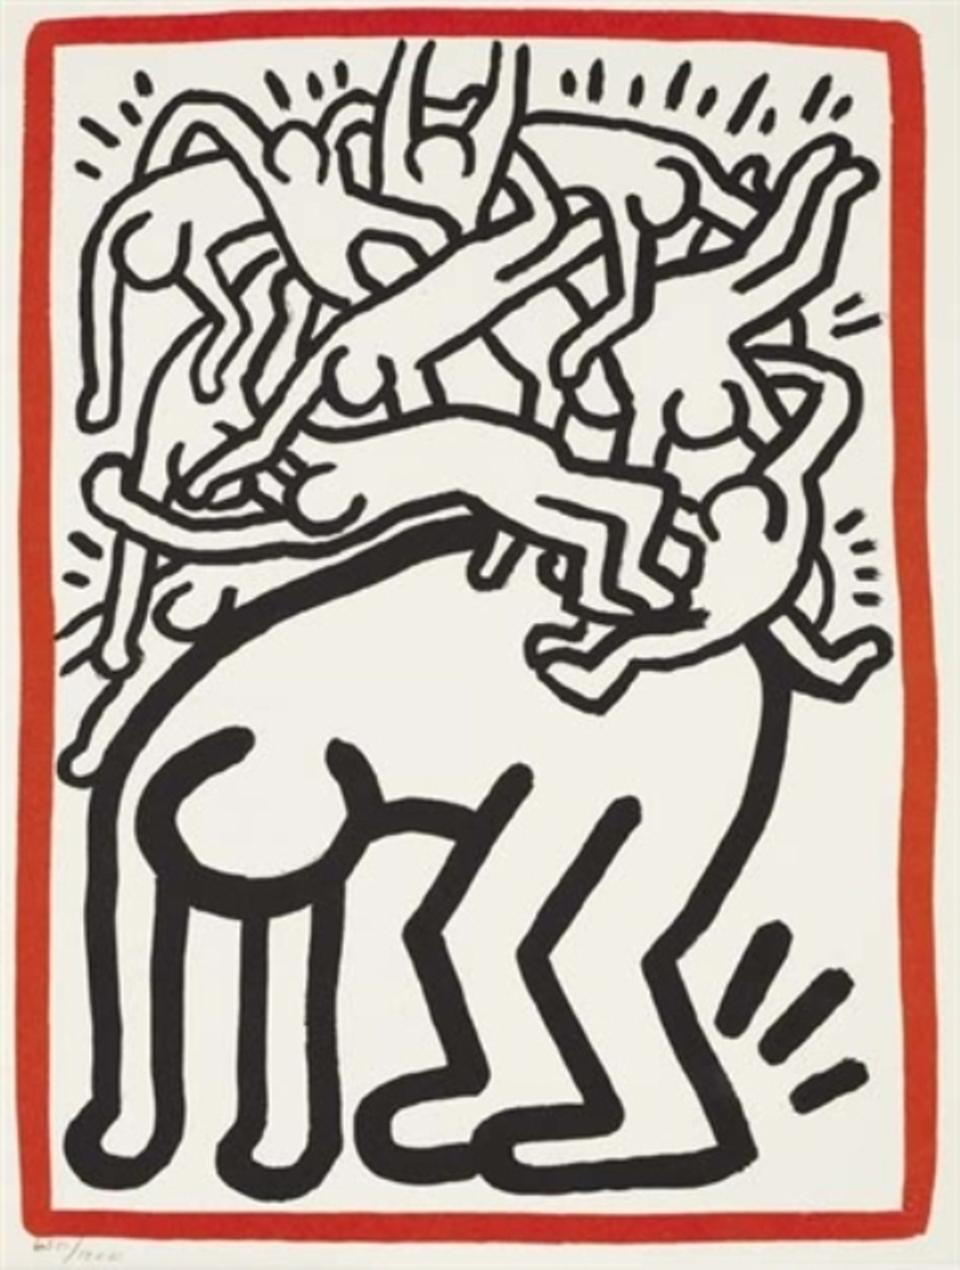 Fight AIDS Worldwide, Keith Haring